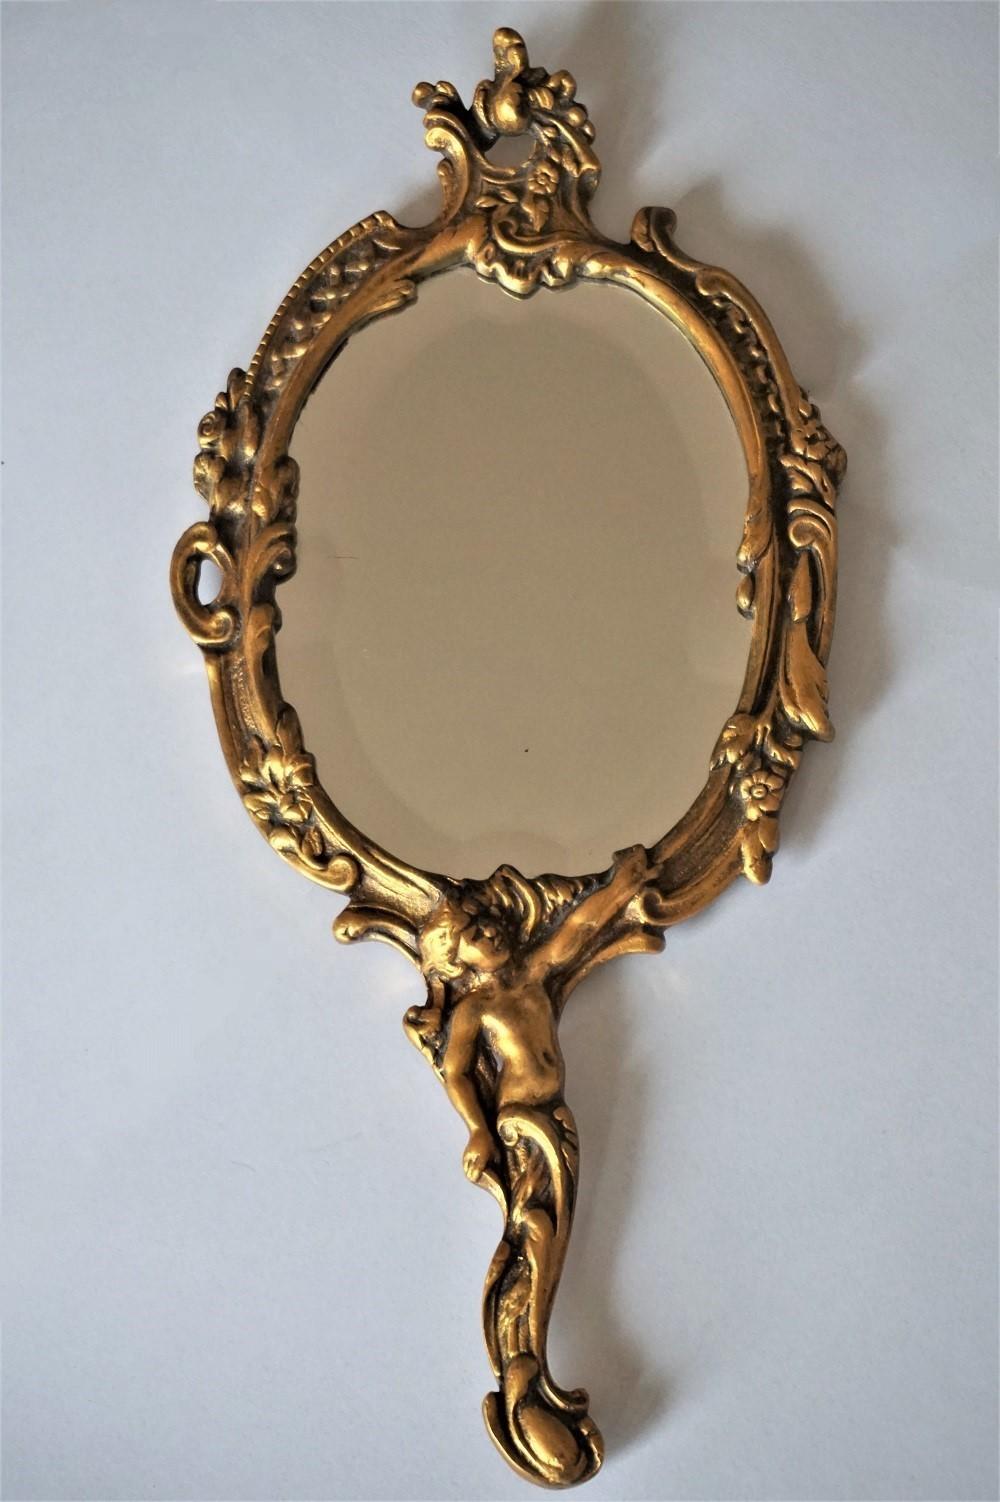 Art Nouveau period gilt bronze faceted nostalgia hand mirror with ornate detailing and arched top, beautiful handle with figure. France, circa 1890.
Measures:
Height 13 in (33 cm)
width 5.75 in (14.5 cm)
Mirror glass only: H 5.75 in / W 4.25 in